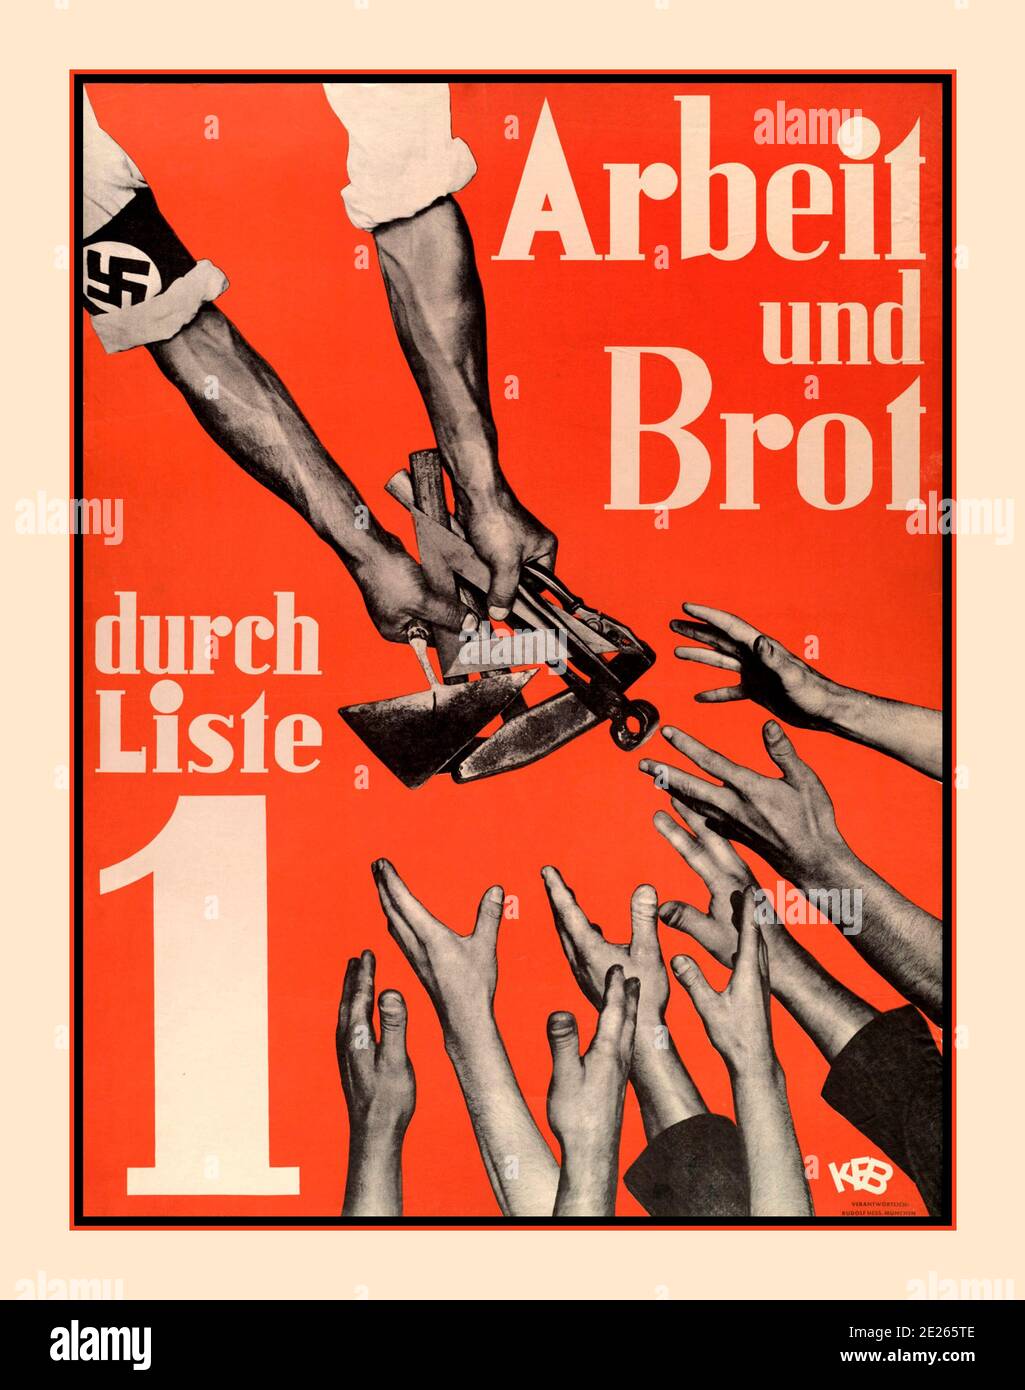 1930’s Germany Election Hitler Propaganda Poster 'Work and Bread' 'ARBEIT UND BROT' , through list 1 Adolf Hitler Political Poster 1930's Election Poster. Hands offering the tools to work, with Swastika emblem on sleeve with desperate hands reaching up. Stock Photo